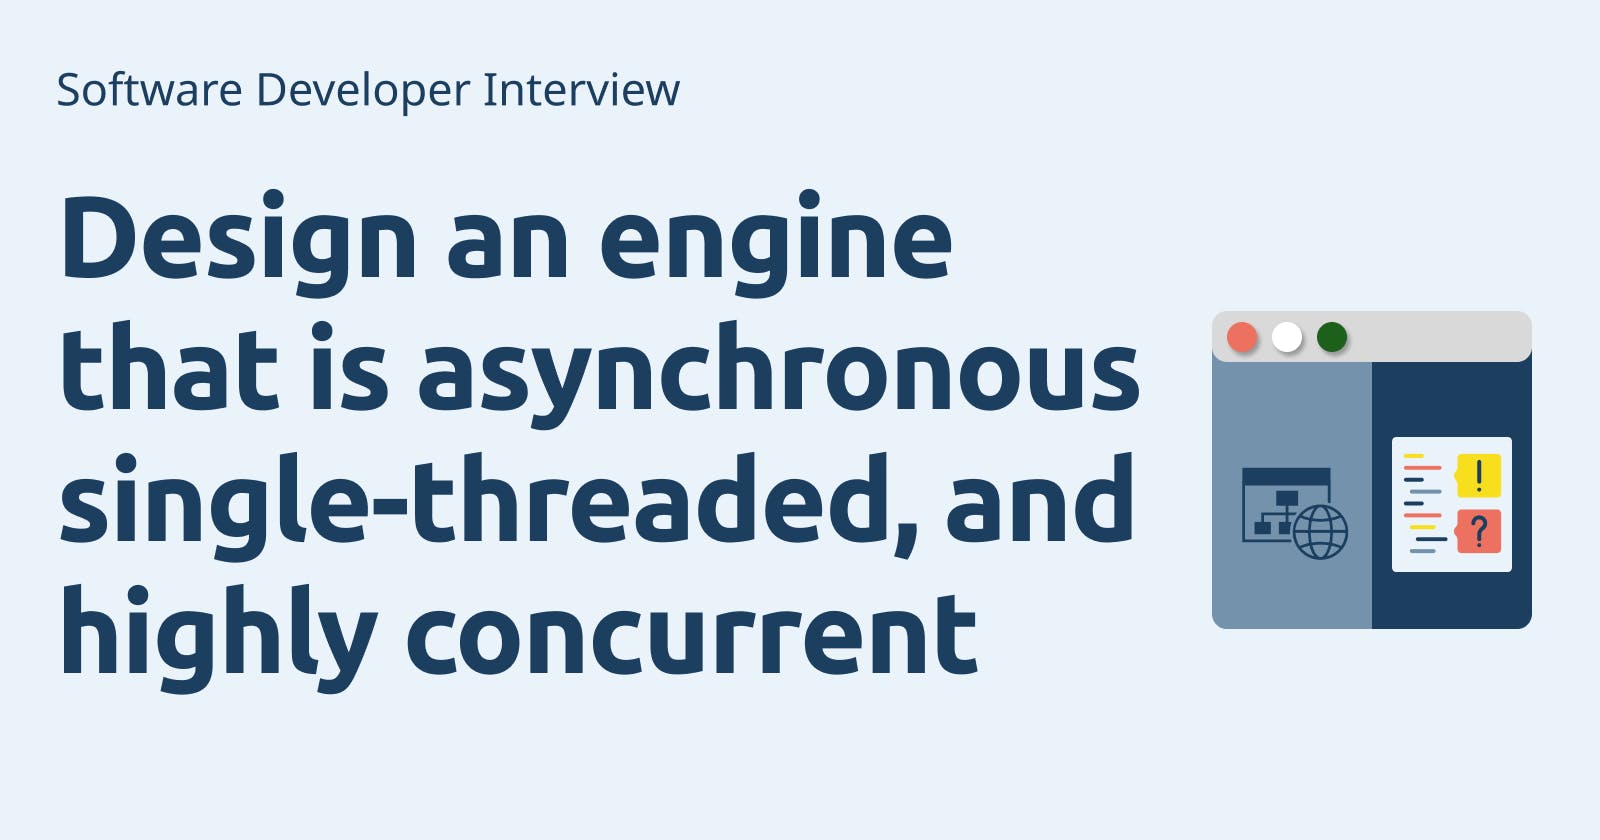 Designing a single-threaded, asynchronous, and highly concurrent engine